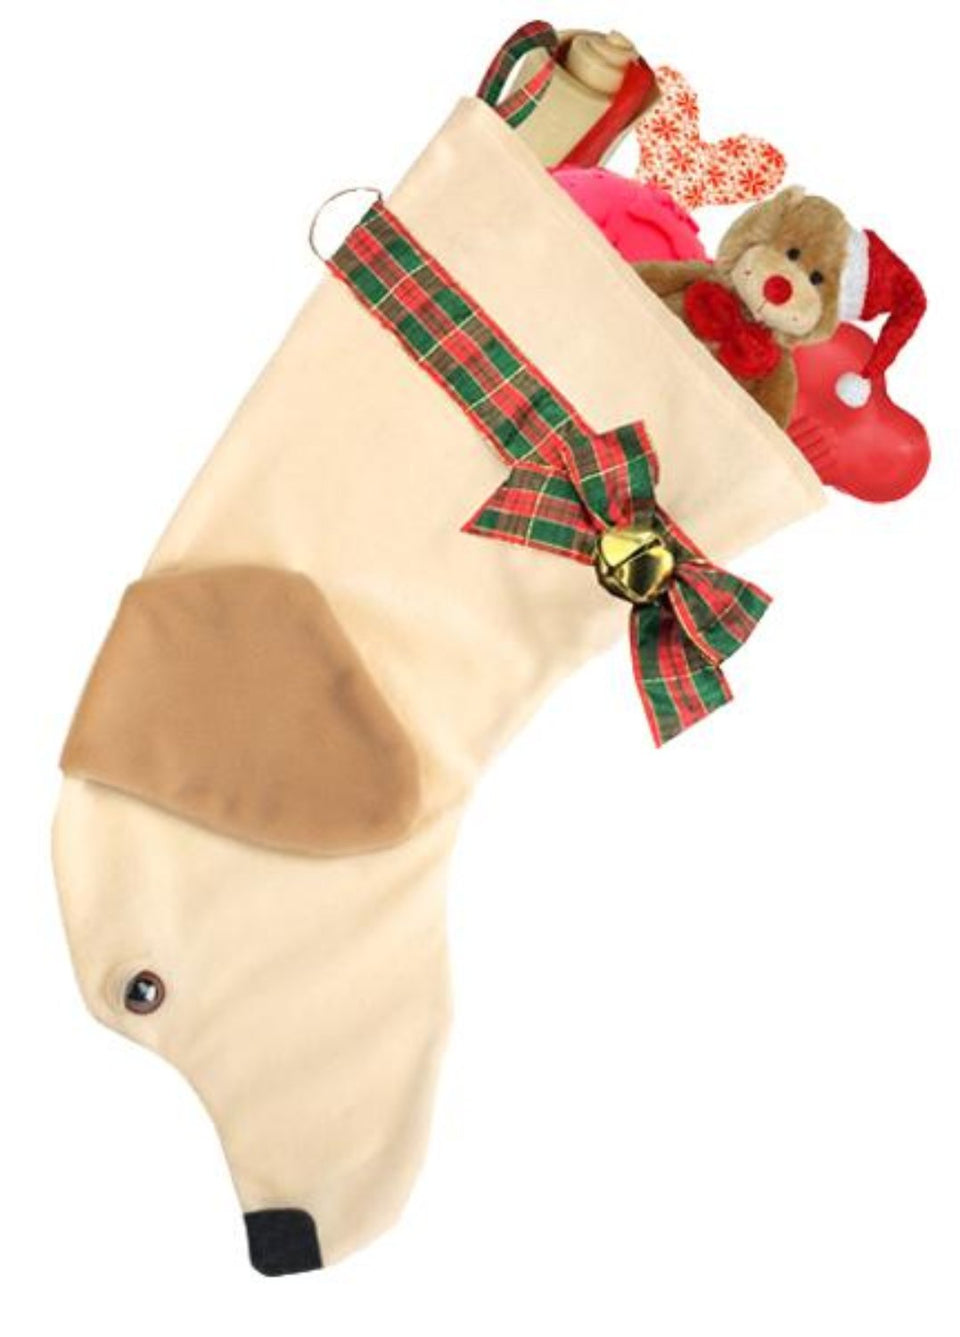 This Yellow Lab shaped dog Christmas stocking is the perfect gift for stuffing toys and treats into to spoil your fur baby for Christmas, or whatever holiday you celebrate!